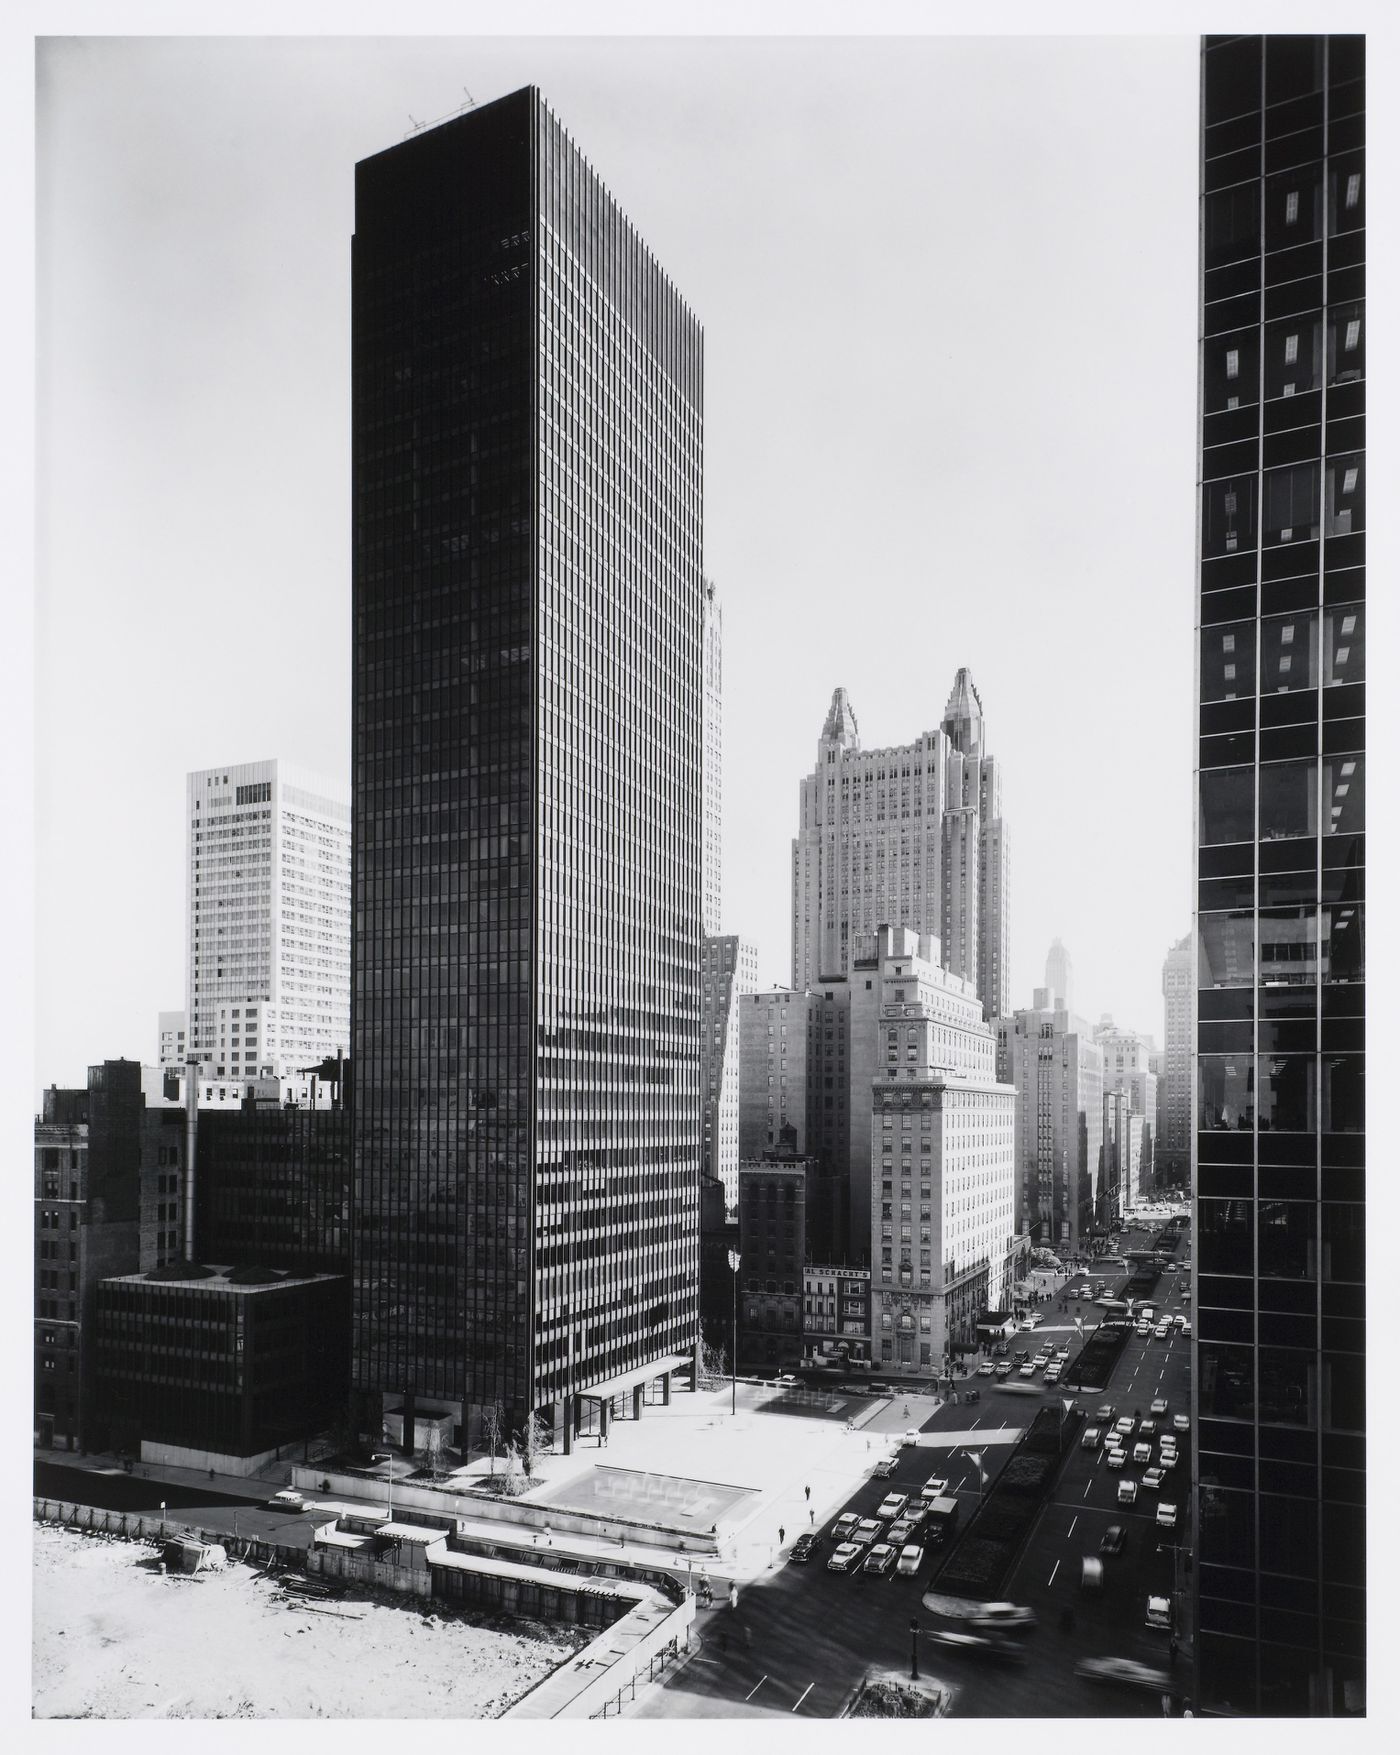 View of Seagram Building, New York City, New York